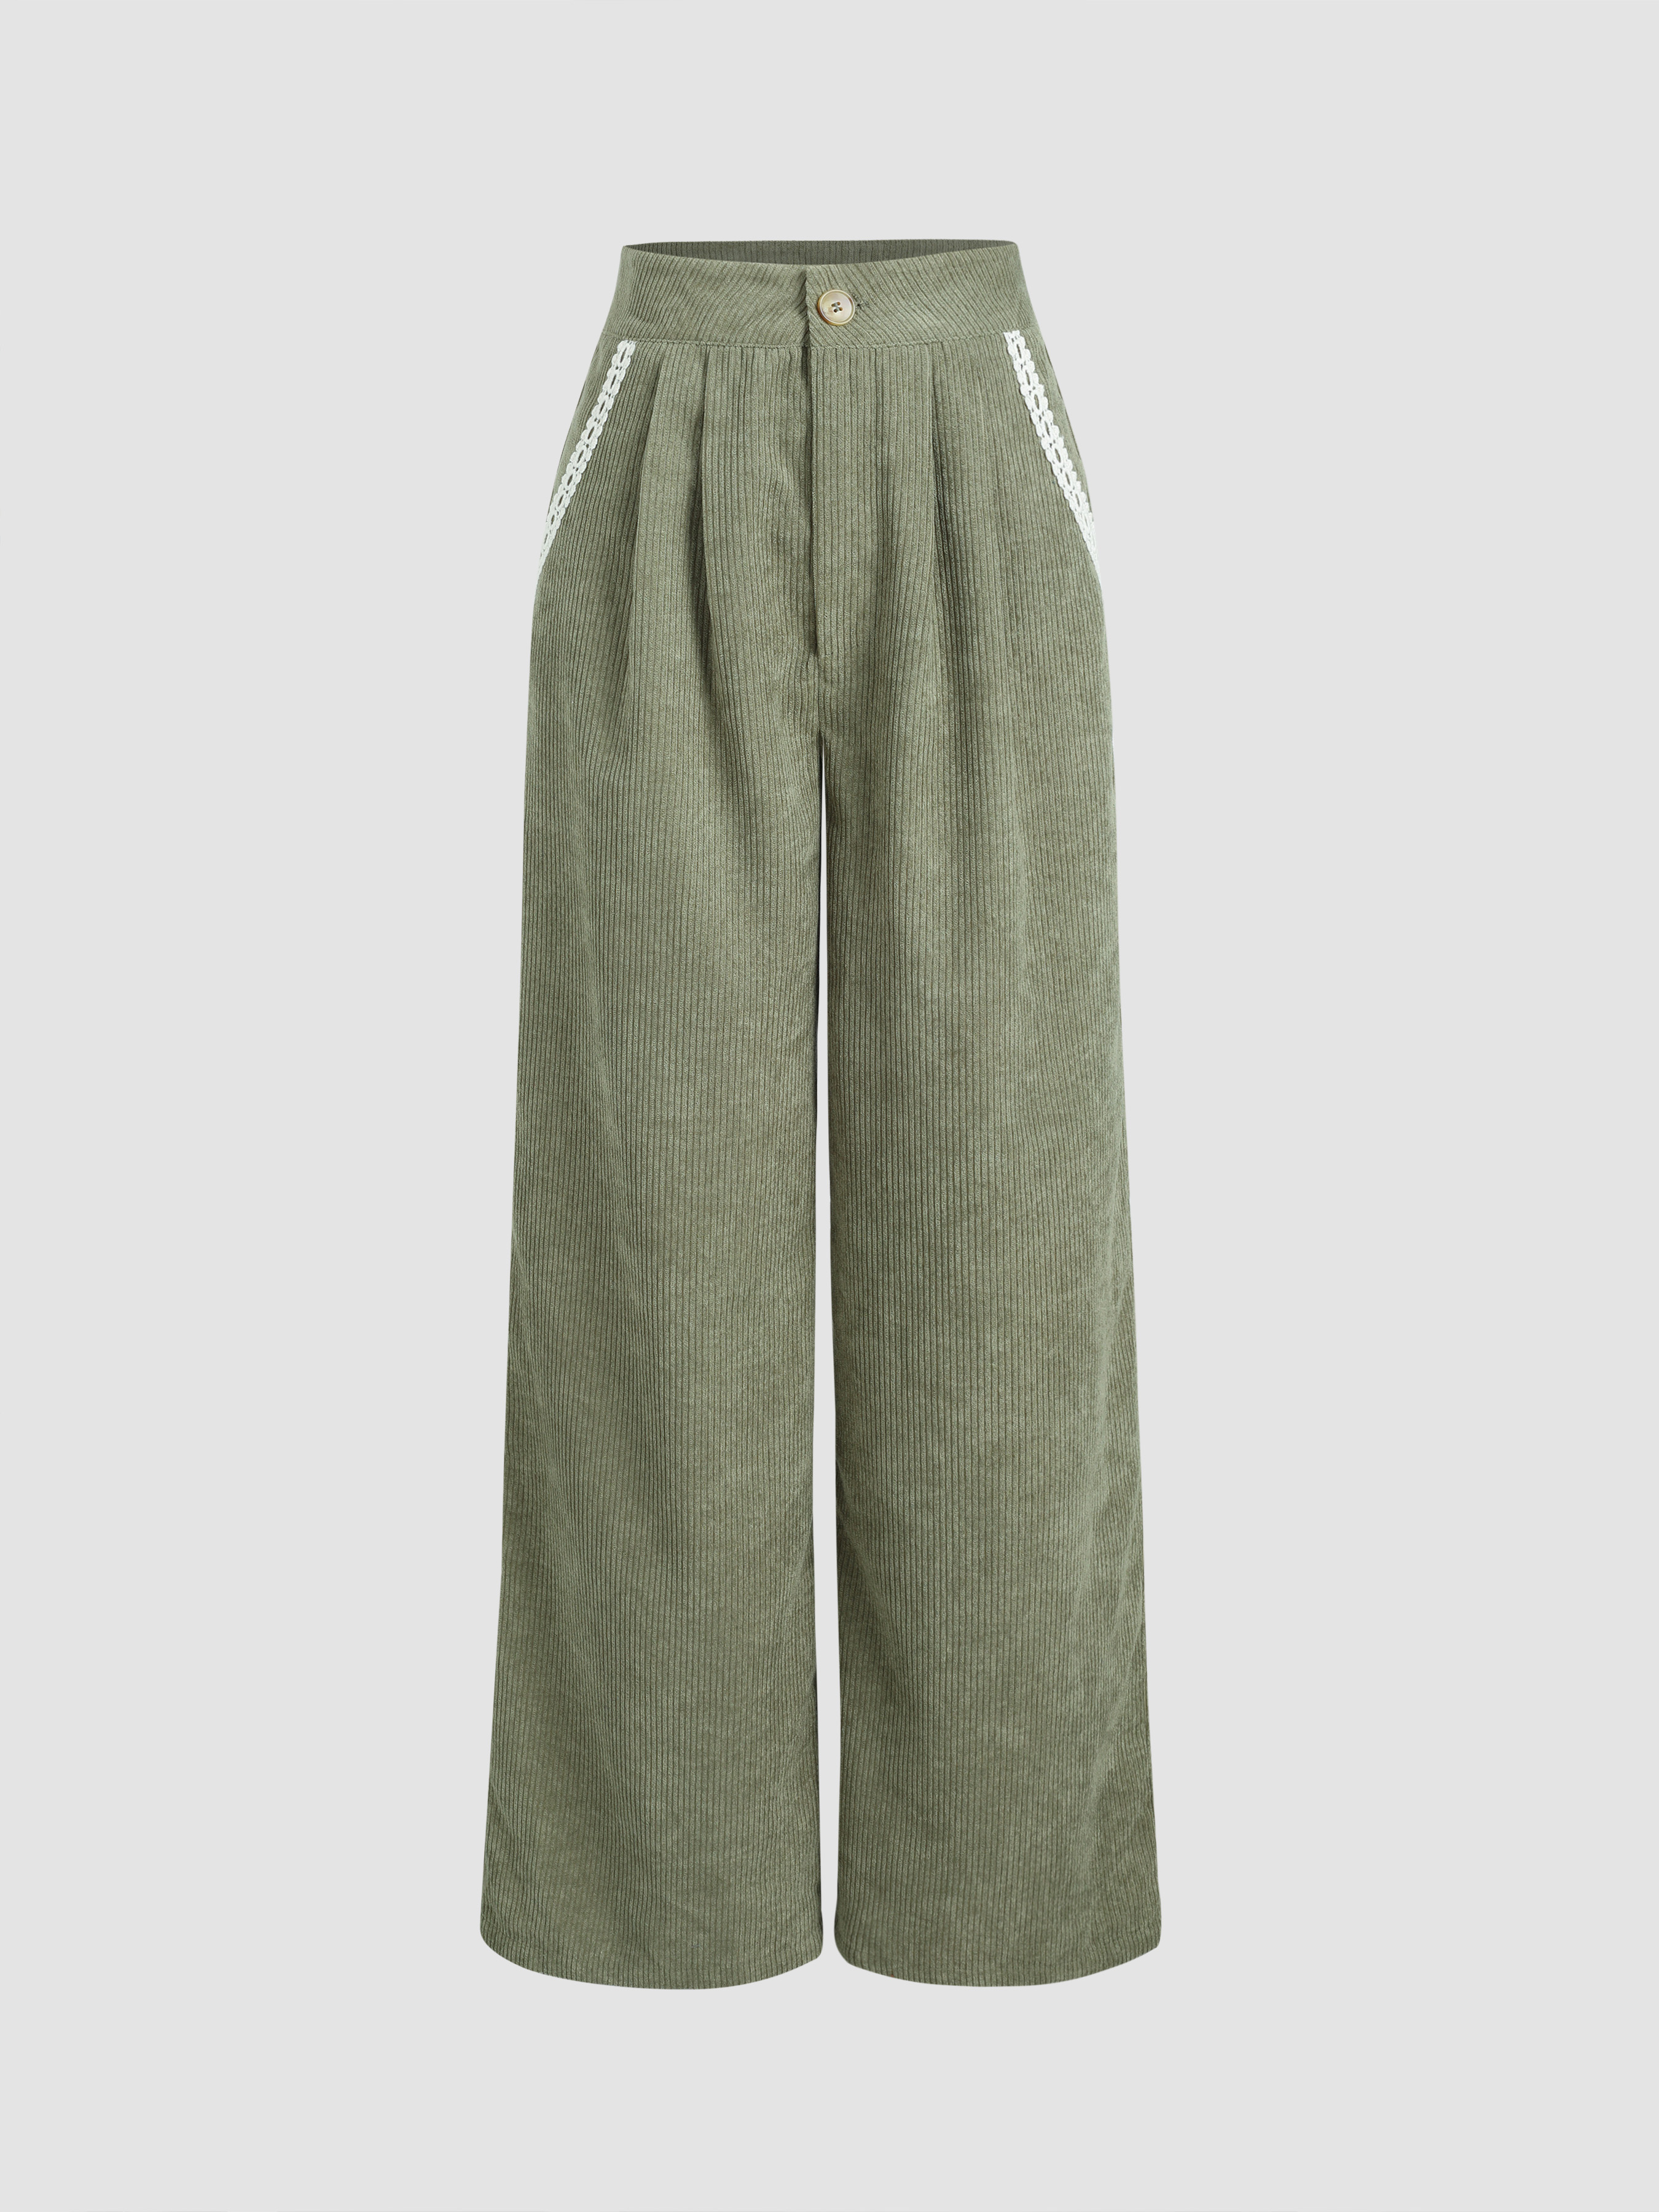 Corduroy Lace Trim Co-ord Trousers - Cider